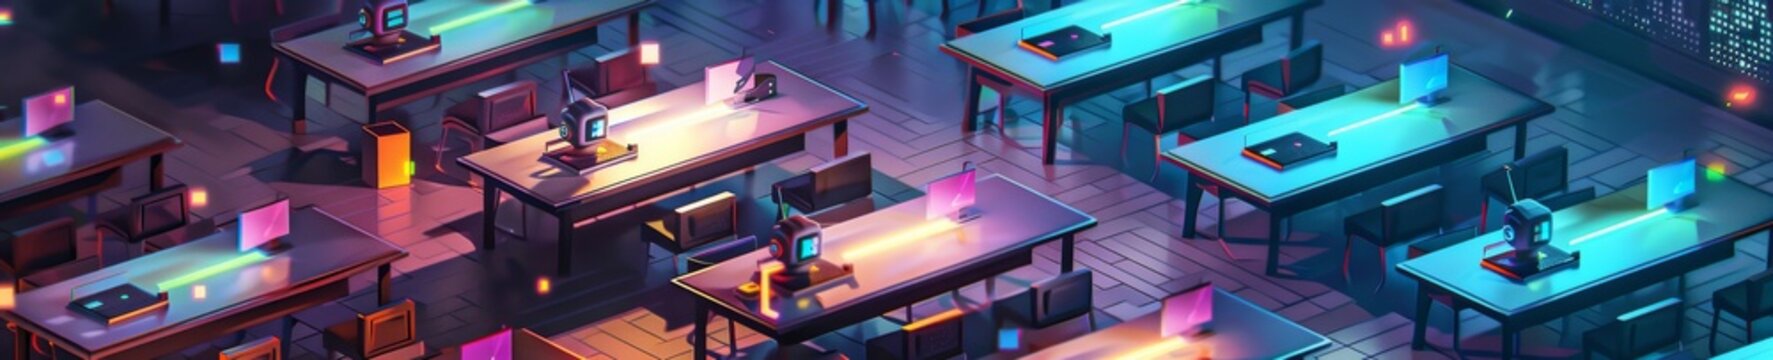 A 3D isometric classroom in the future, with glowing desks and cute, miniature robots teaching students